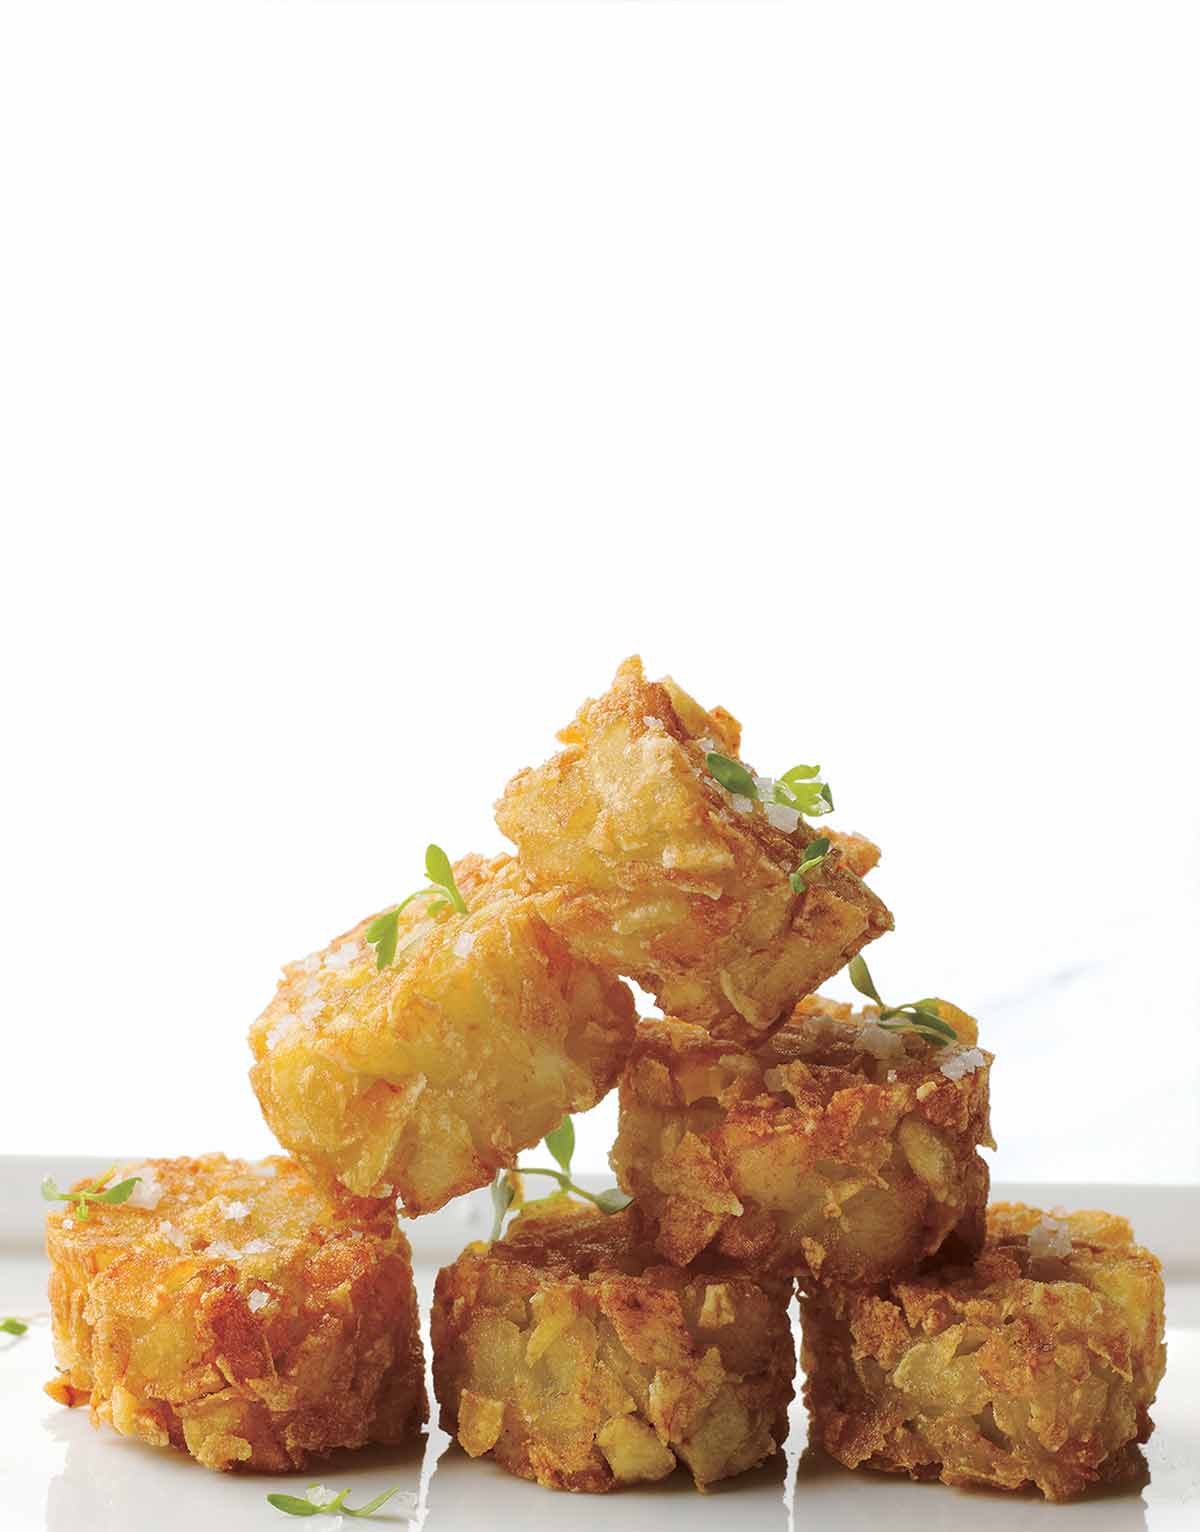 A stack of six homemade tater tots, sprinkled with sea salt.